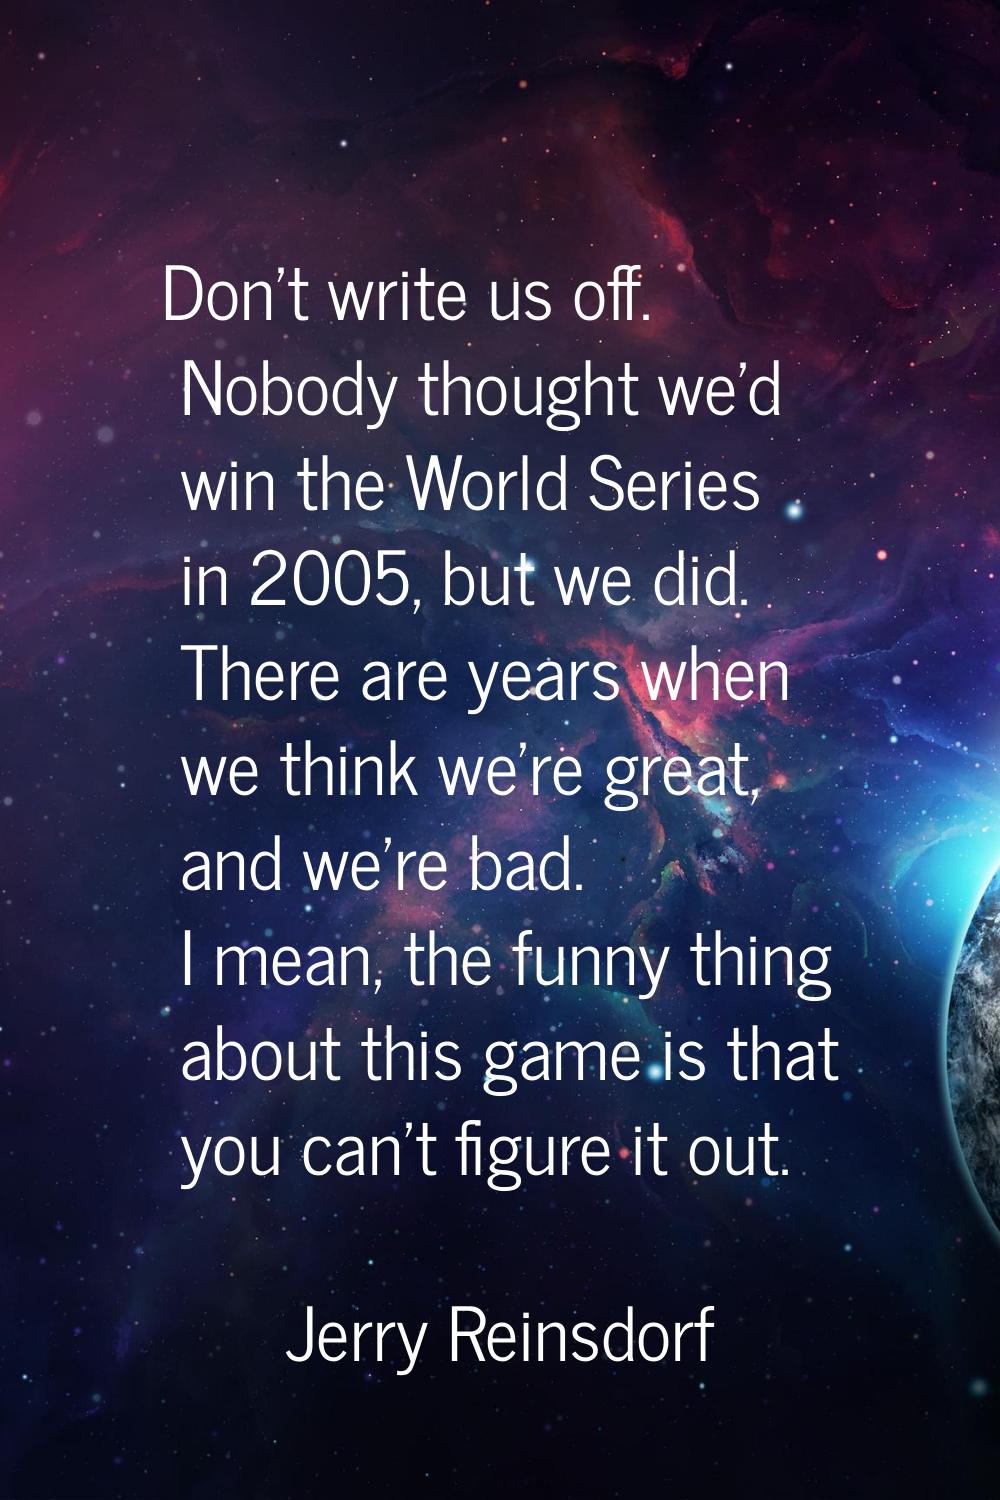 Don't write us off. Nobody thought we'd win the World Series in 2005, but we did. There are years w